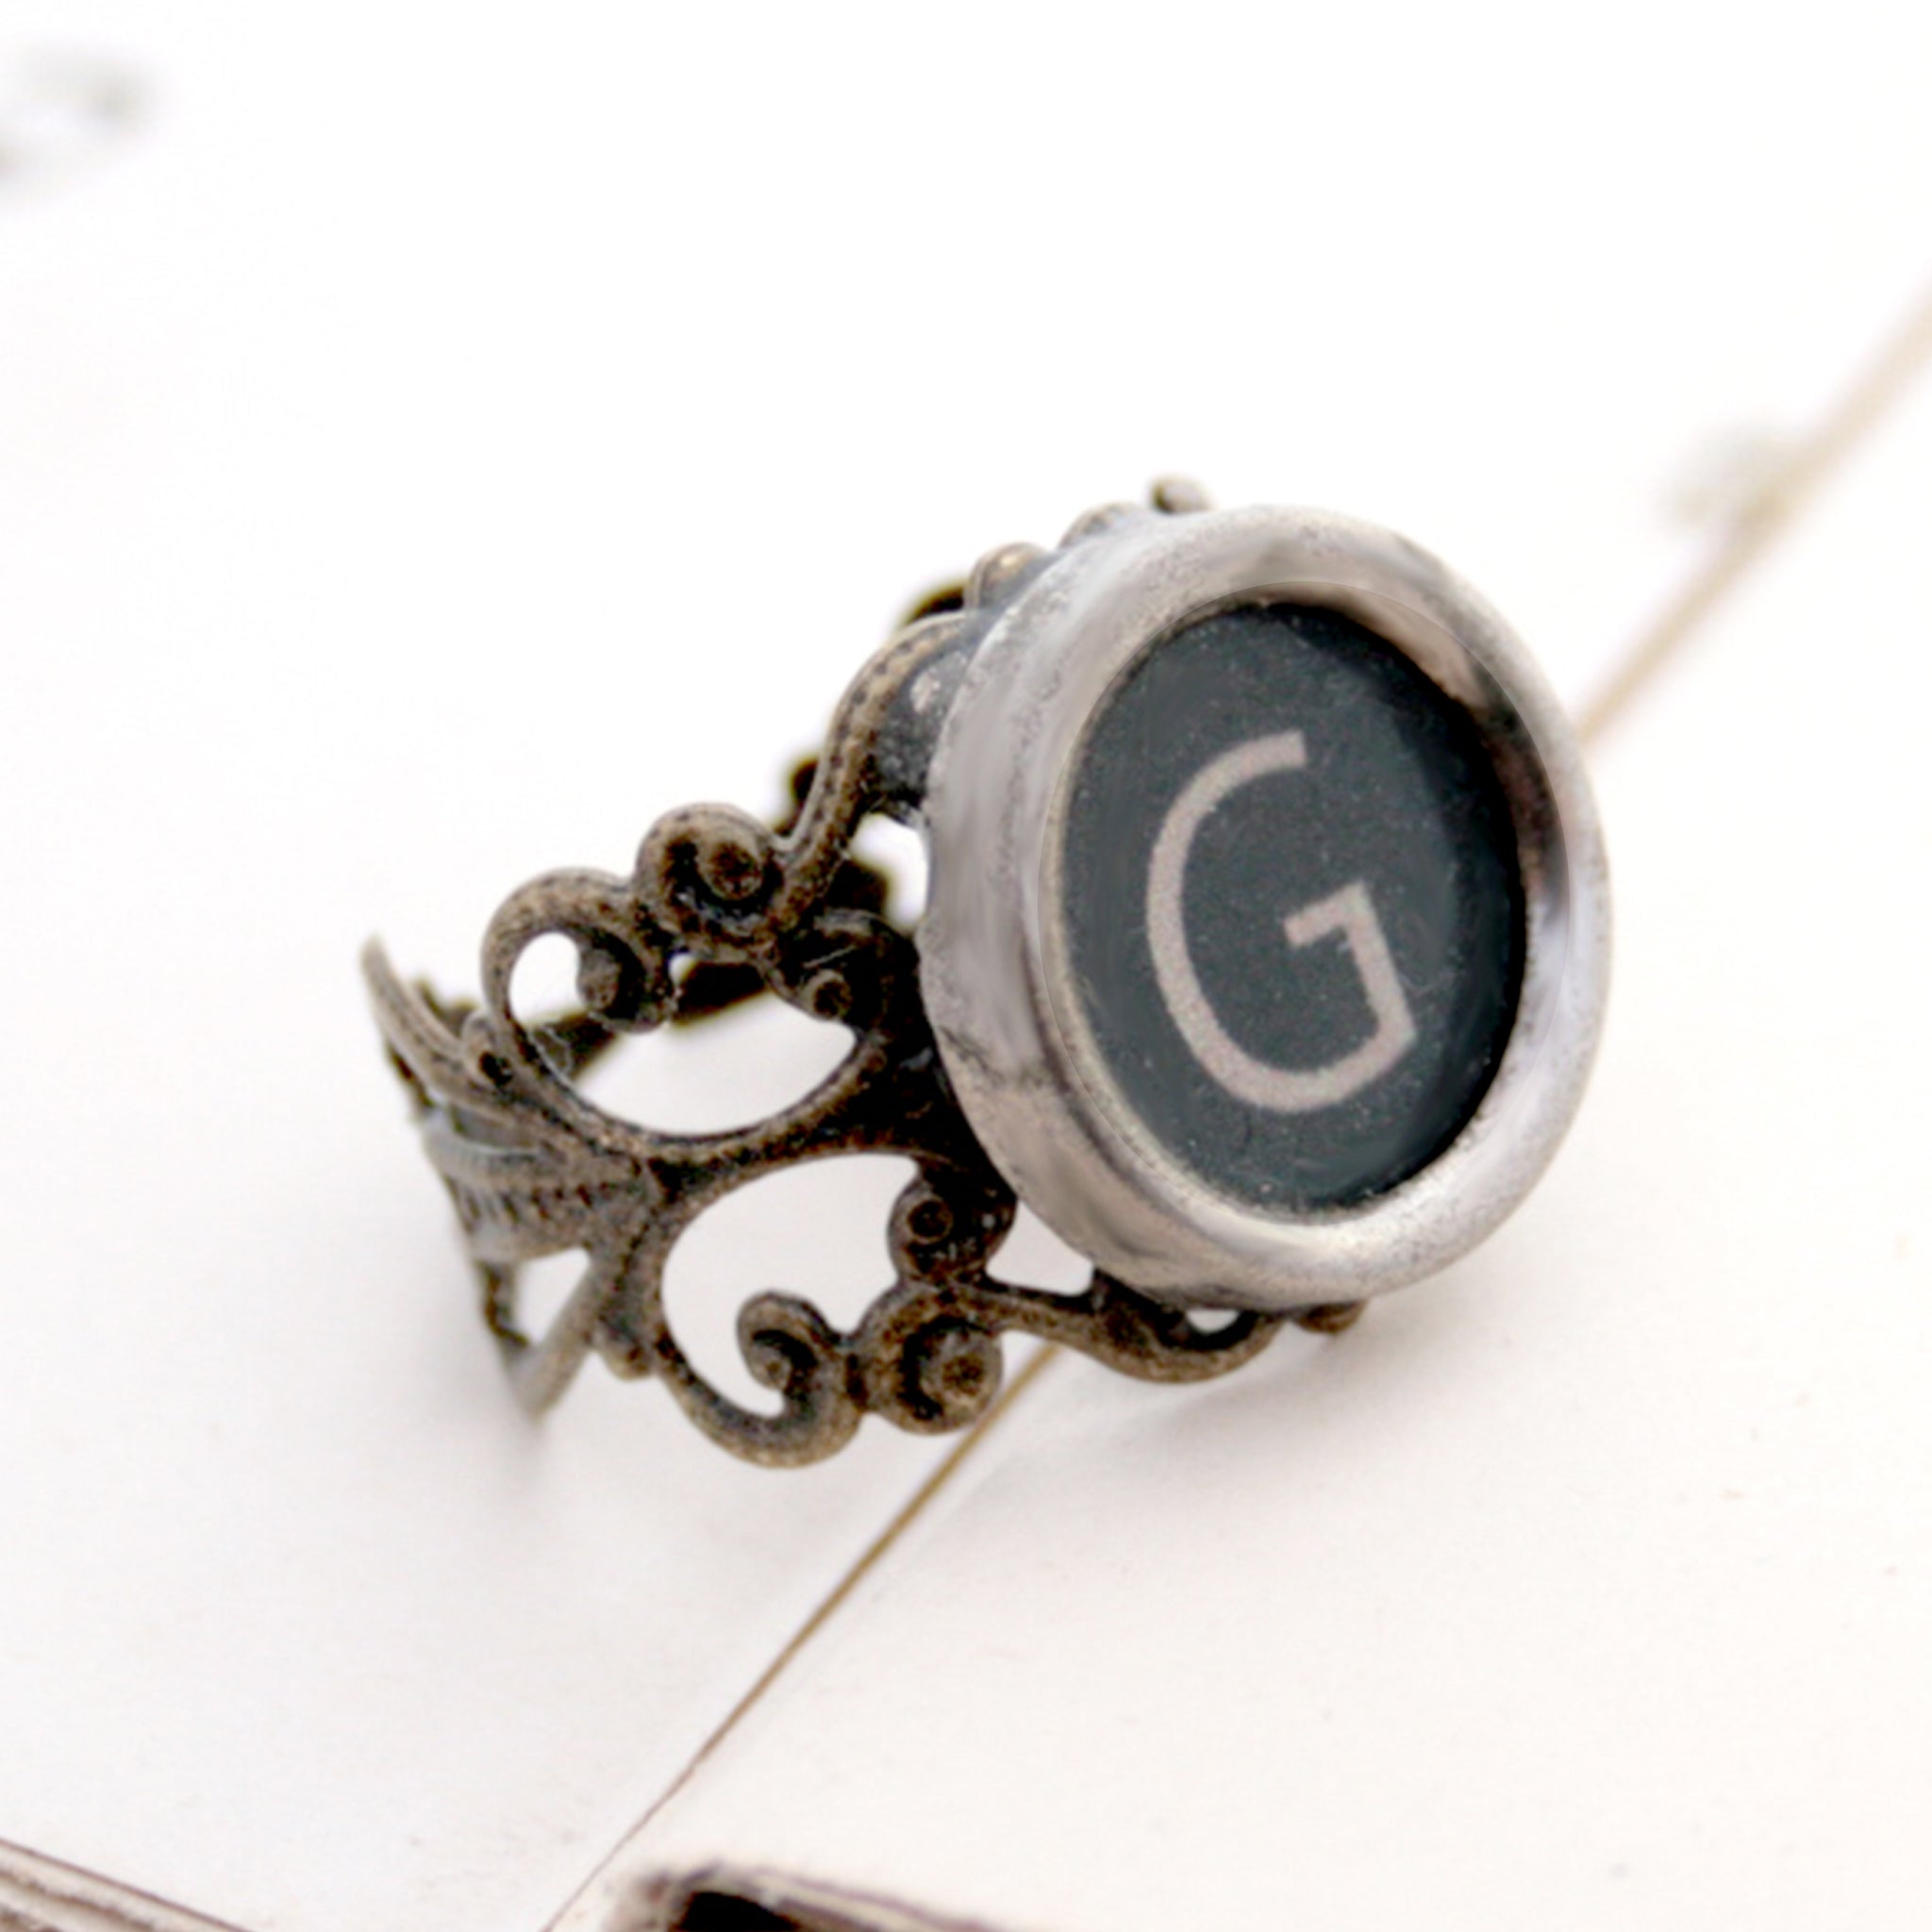 initial ring made of authentic vintage typewriter key in black color